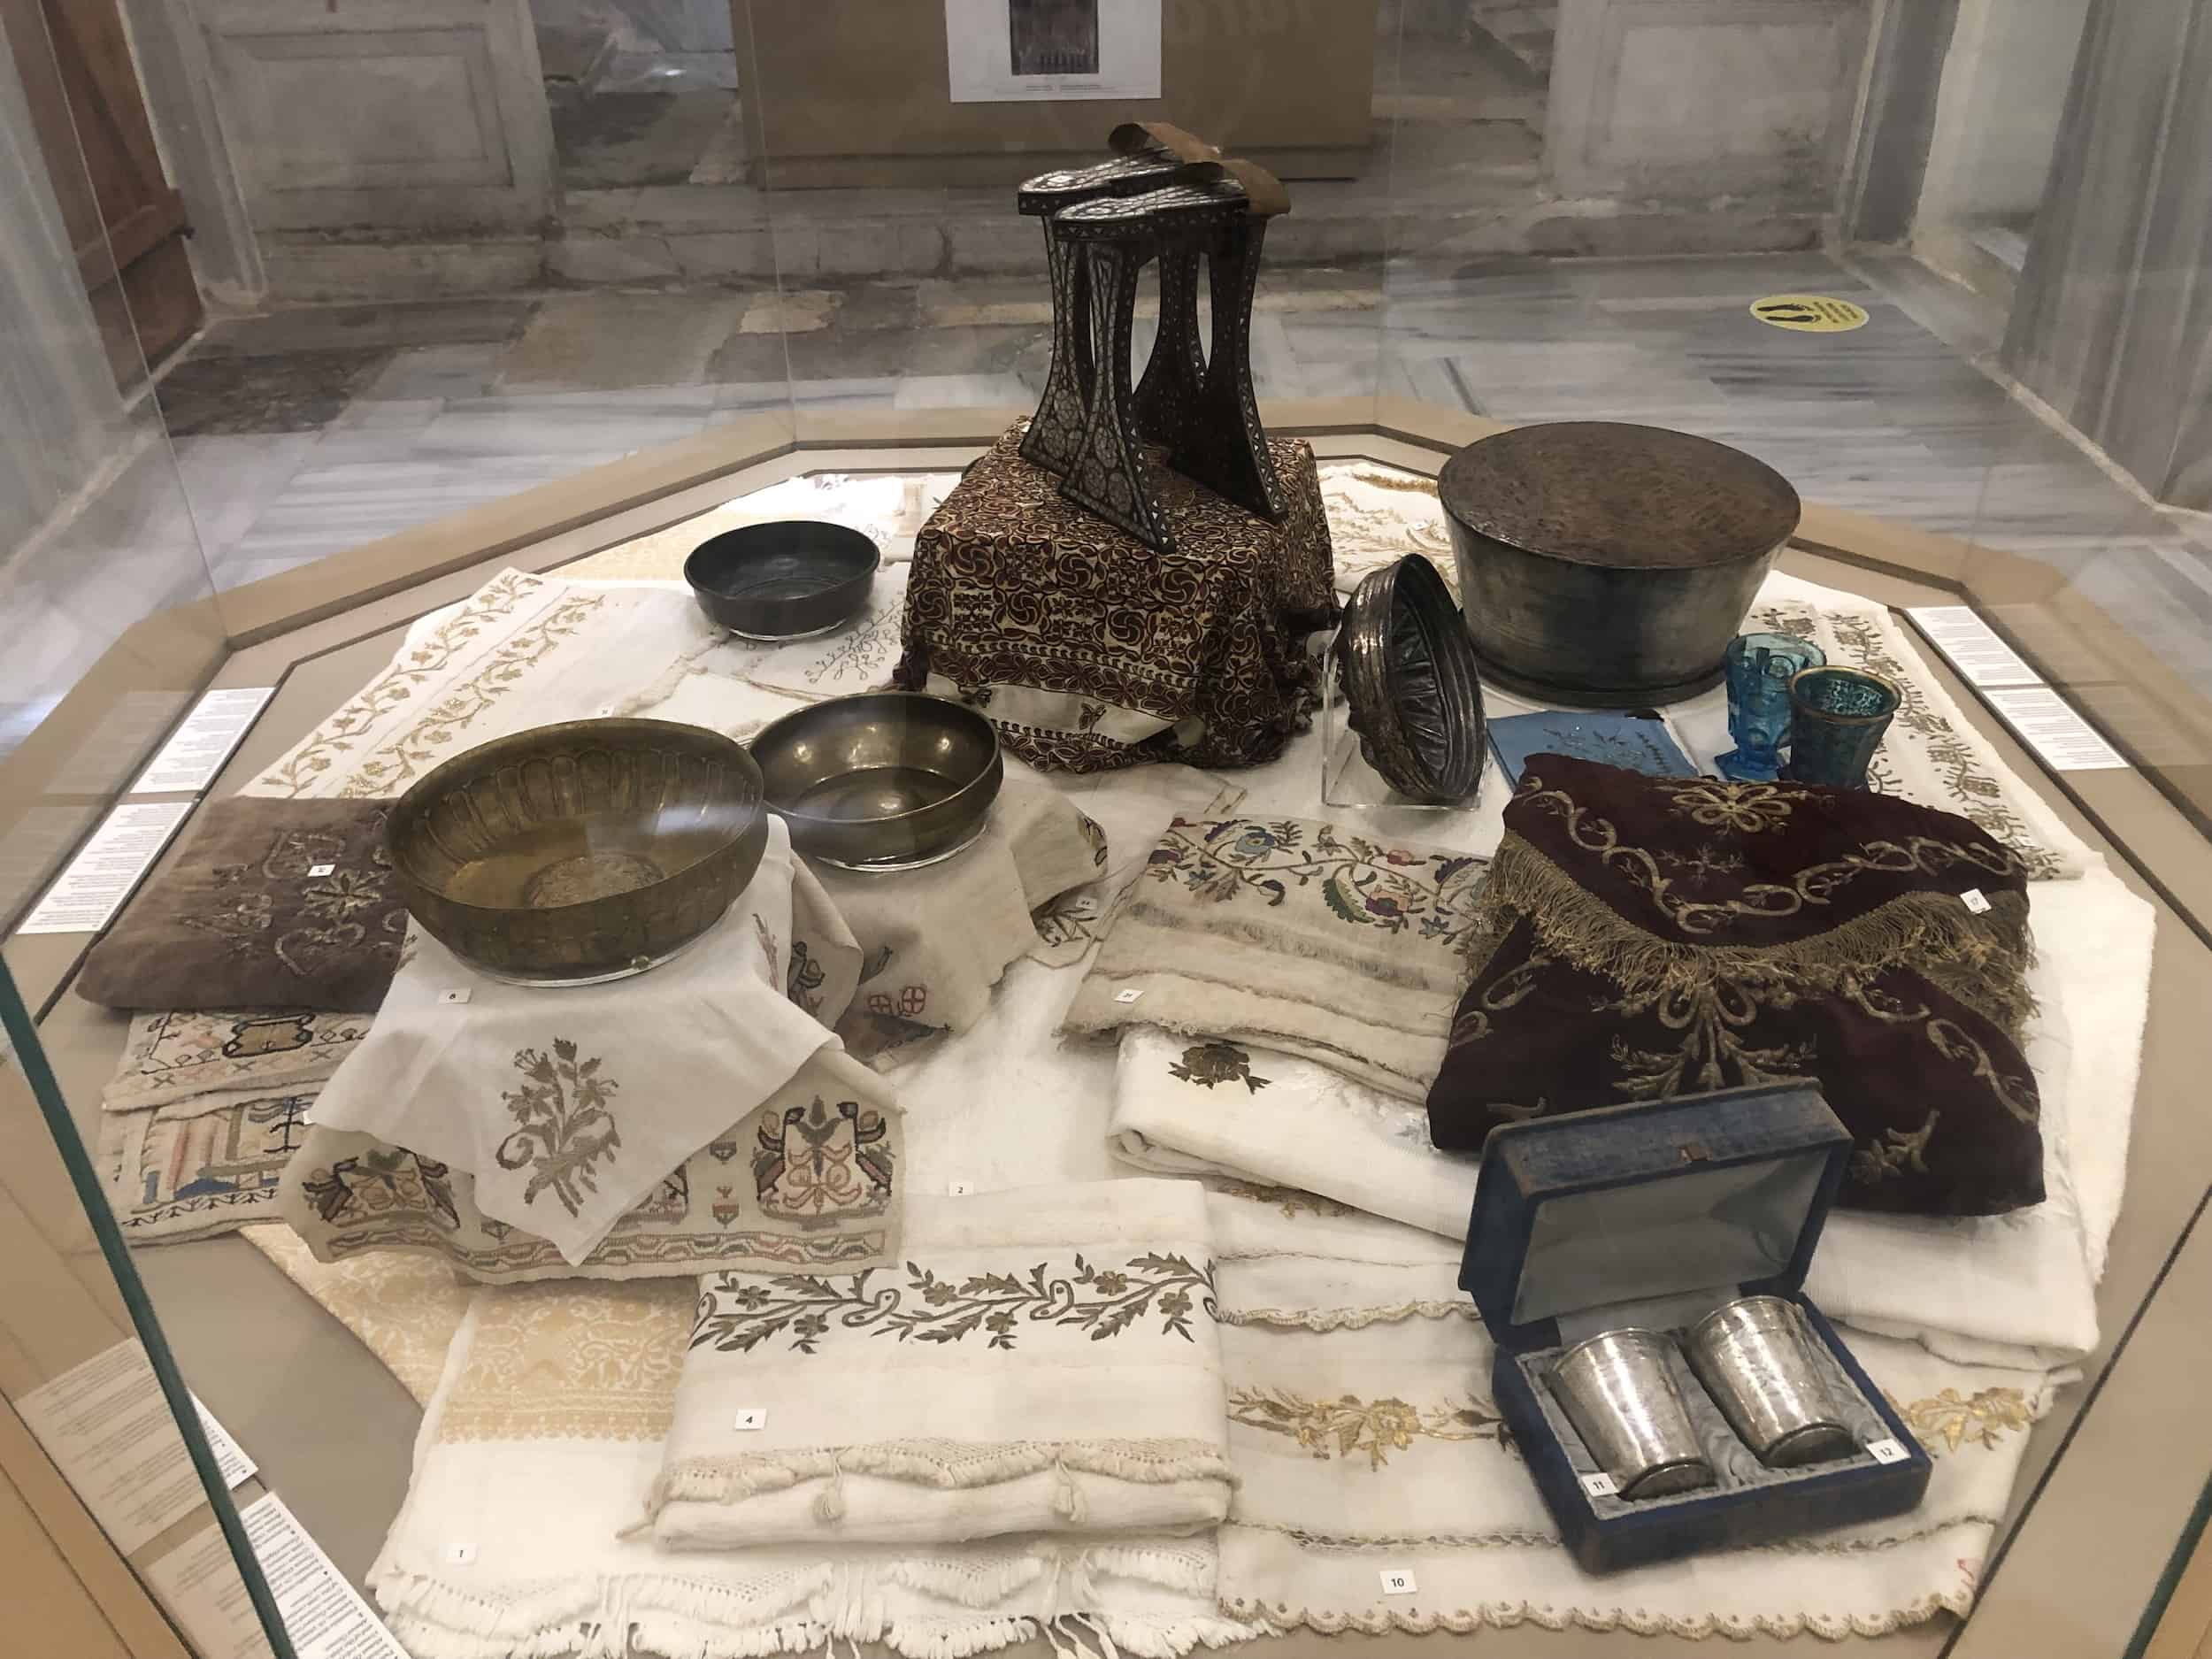 Ethnographic items in the women's hot room at the Bayezid II Hamam